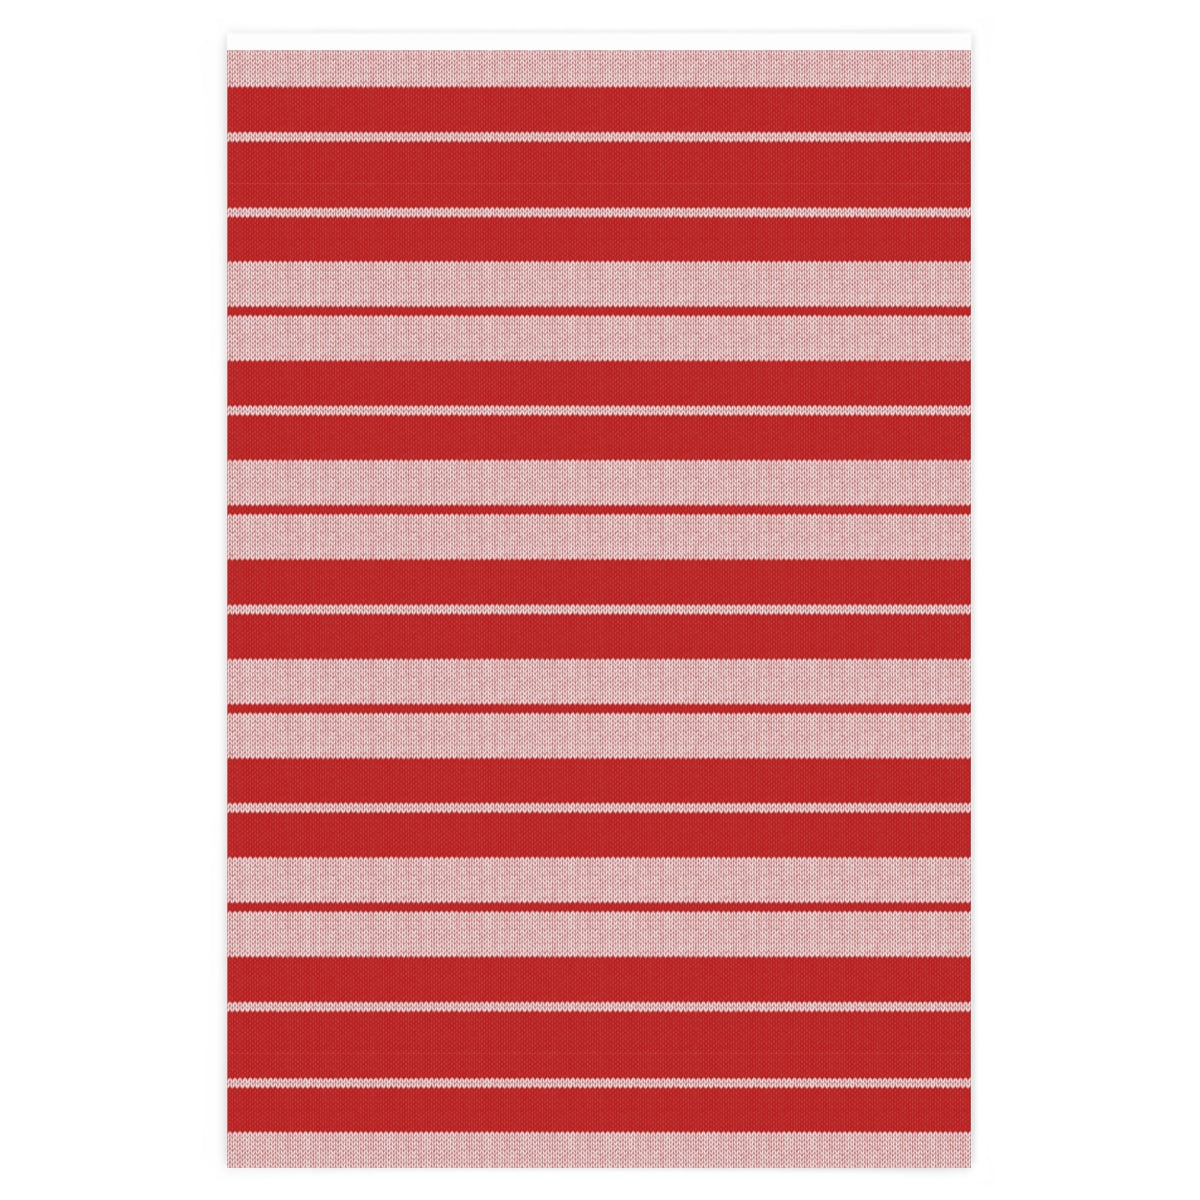 OG Charlie Brown Stripe (Red & White) - Wrapping Paper